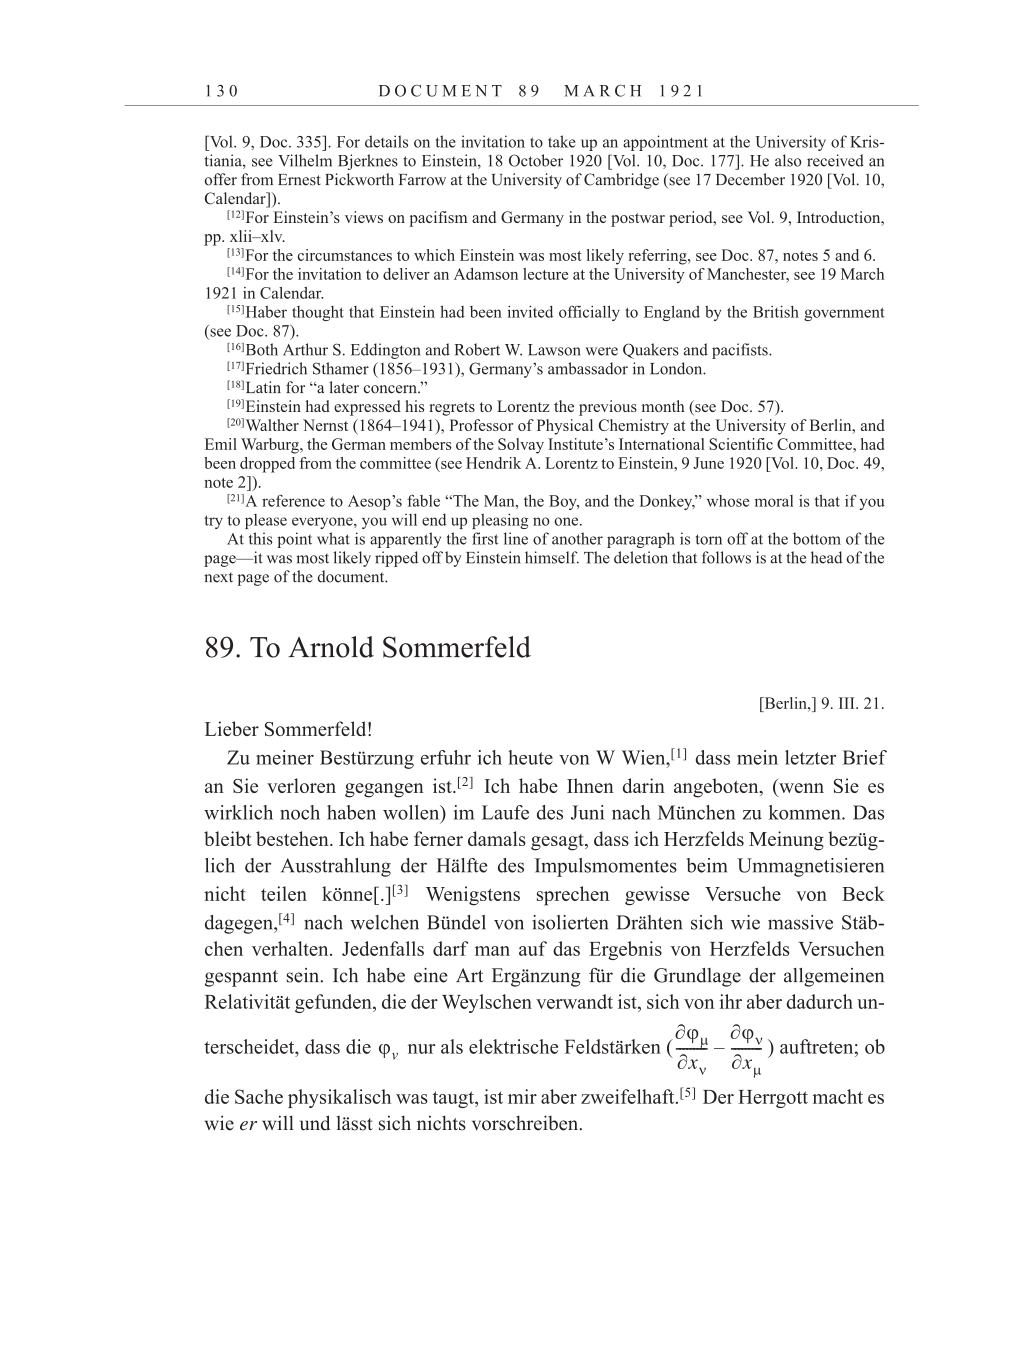 Volume 12: The Berlin Years: Correspondence January-December 1921 page 130